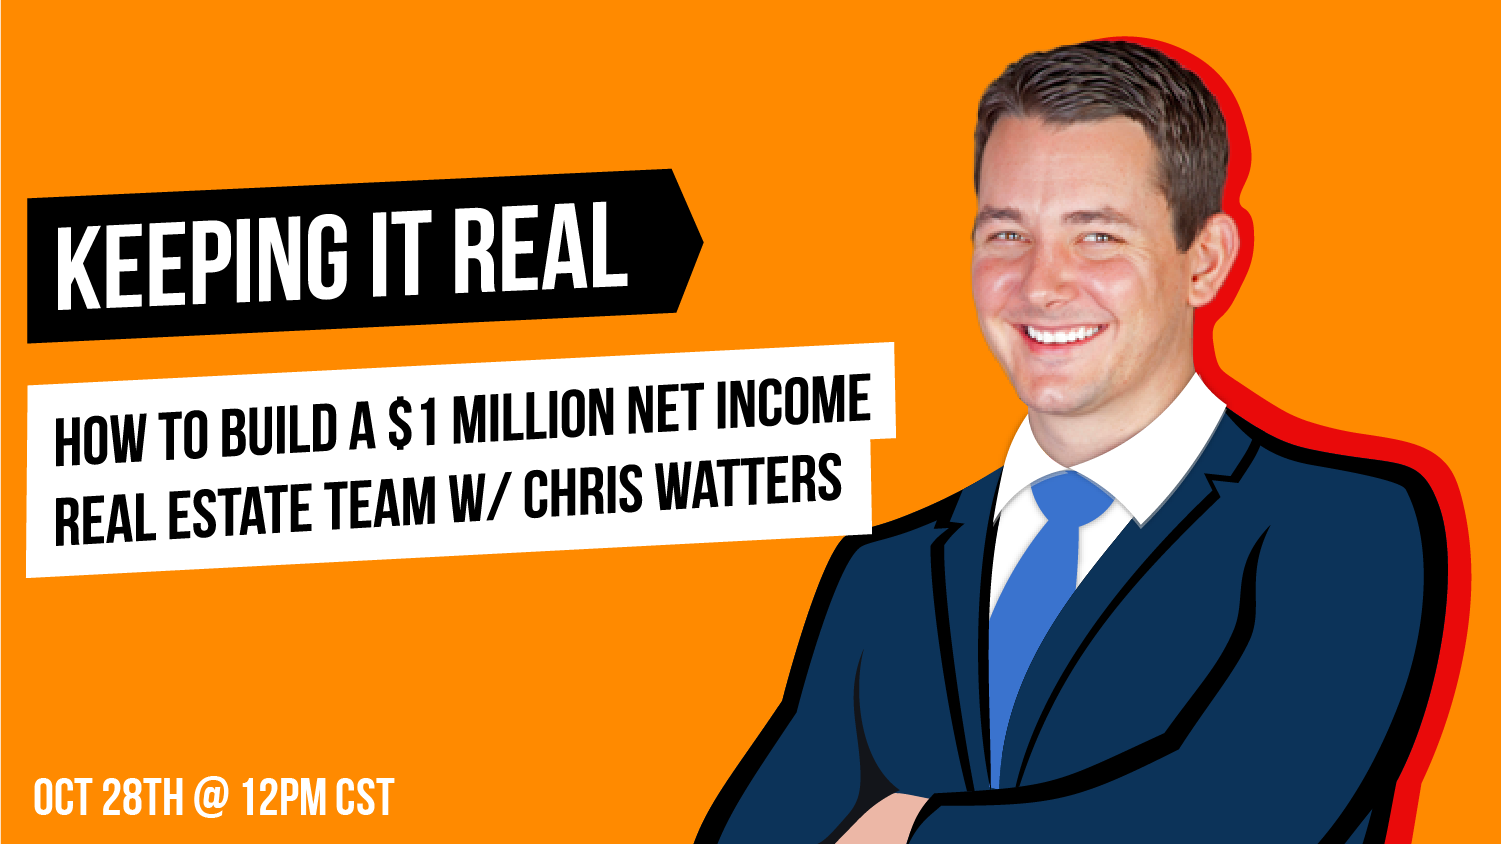 How To Build a $1 Million Net Income Real Estate Team w/ Chris Watters